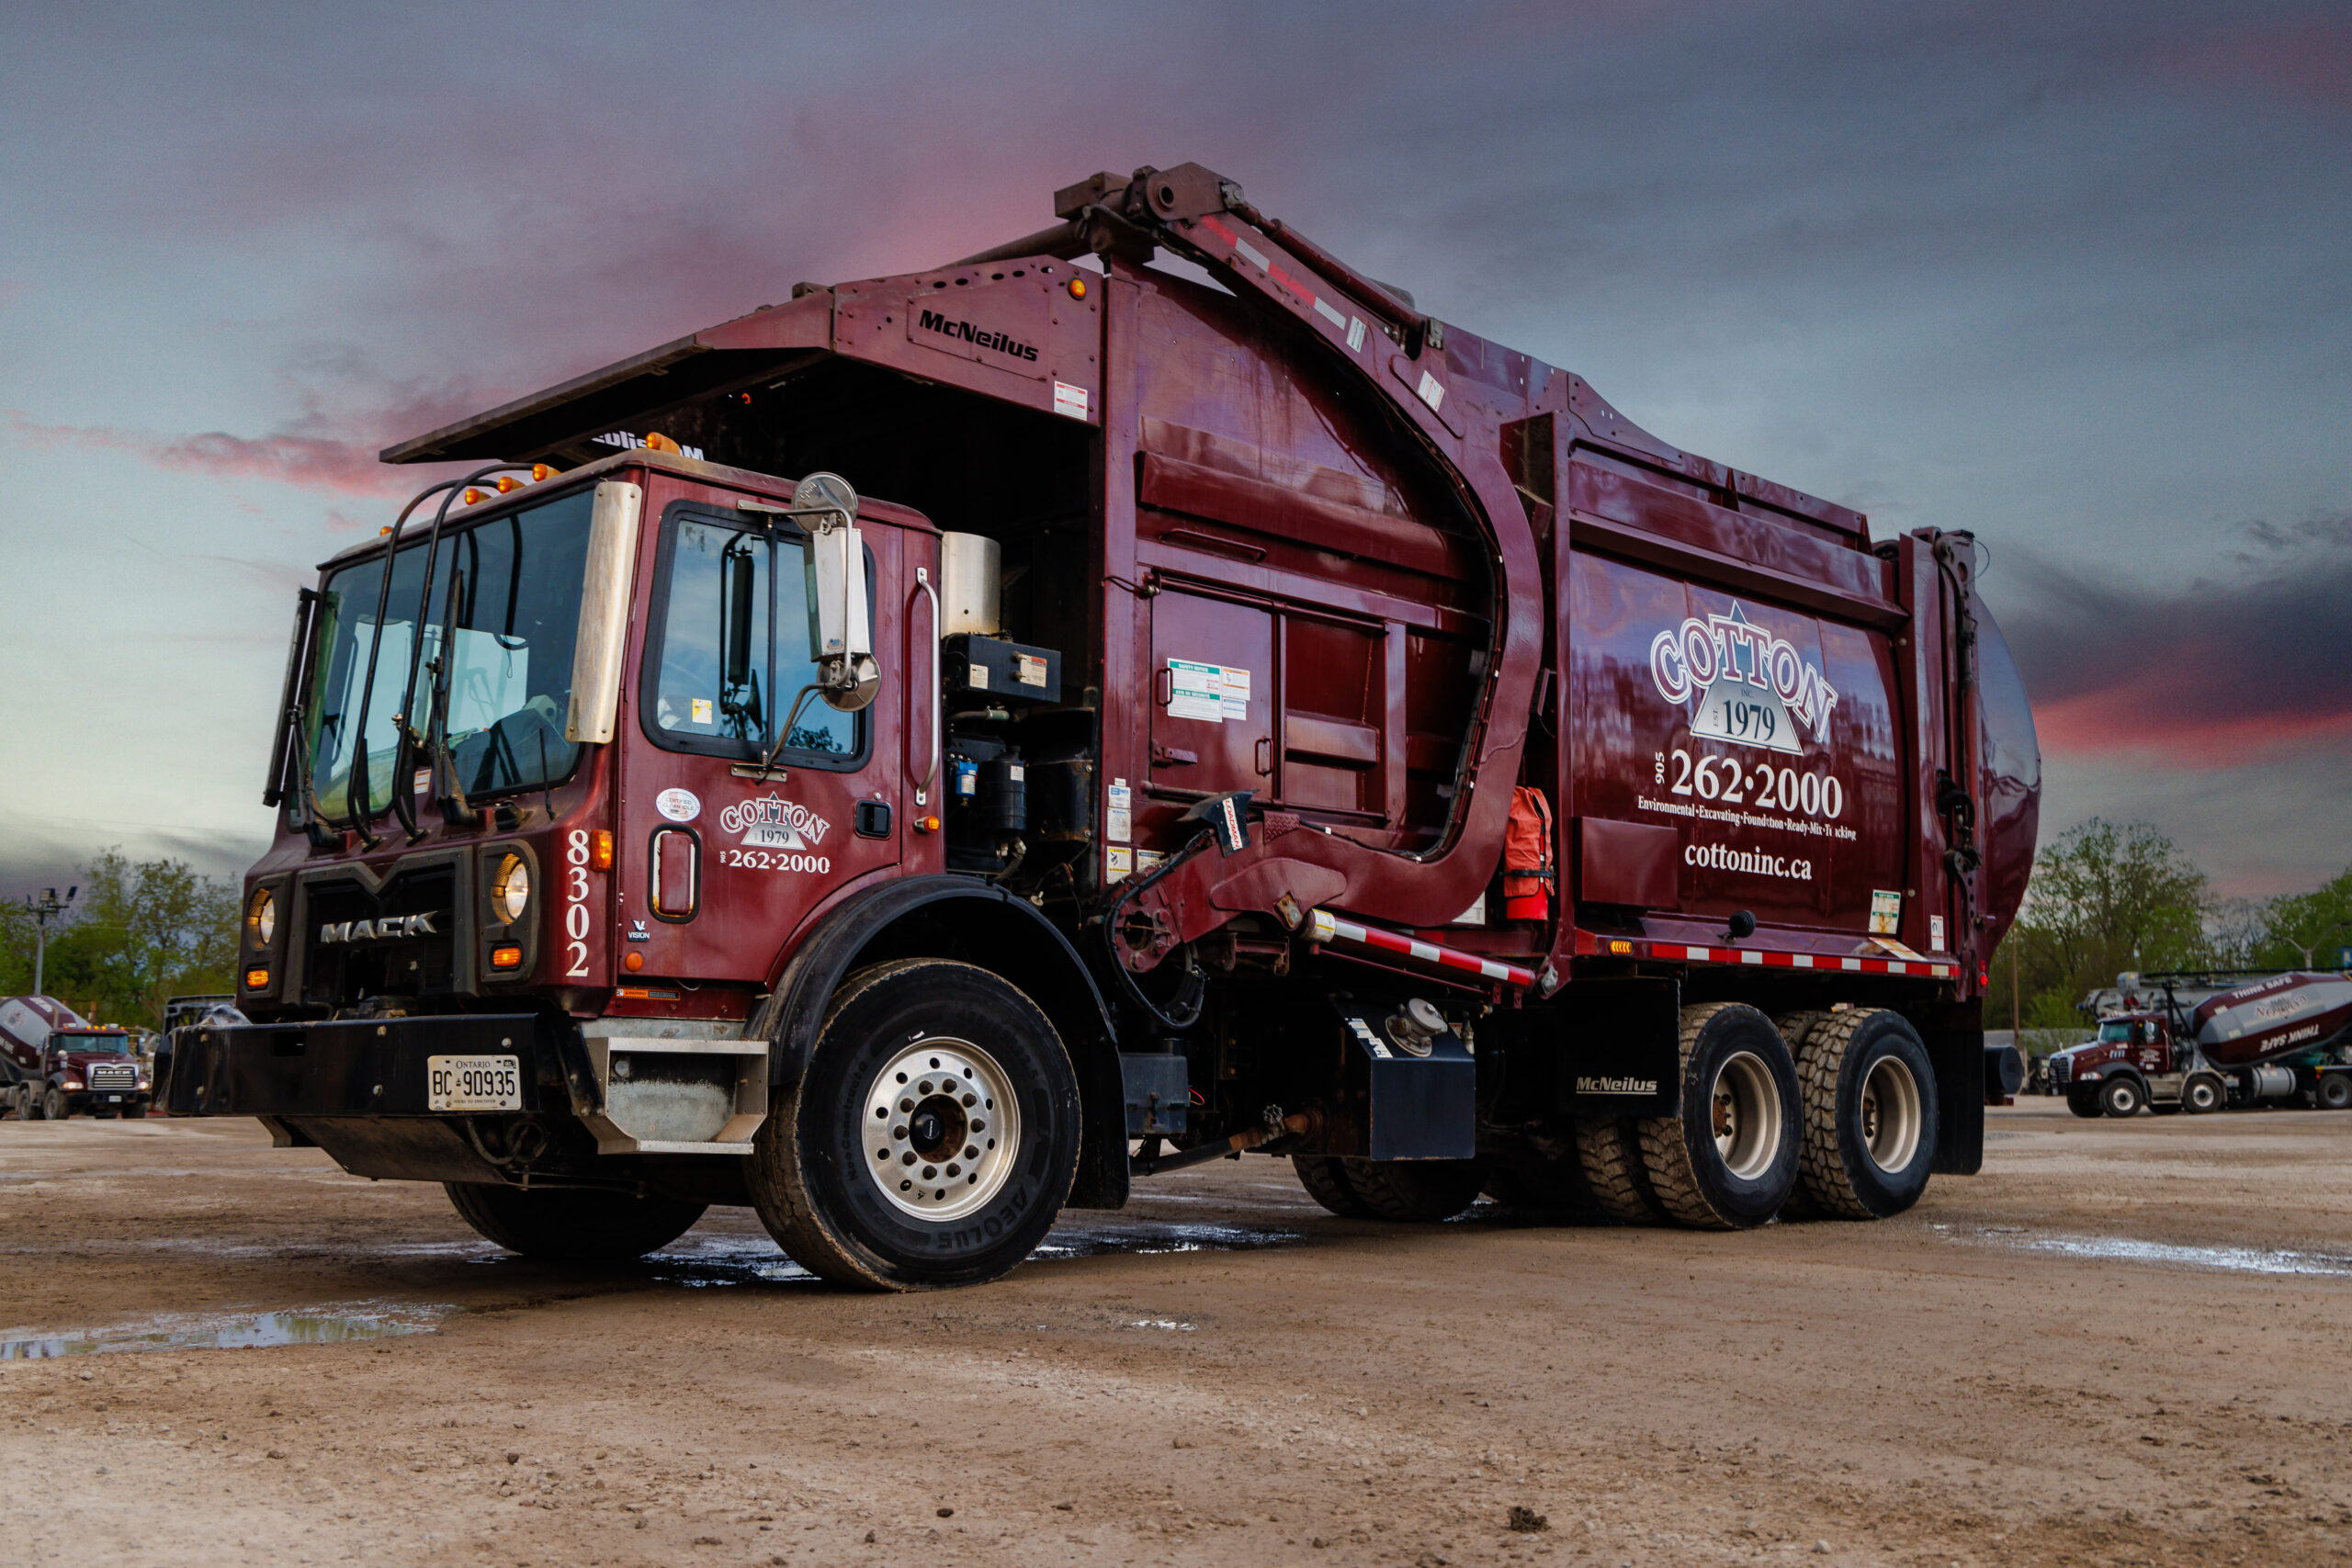 This photo shows a maroon garbage truck with Cotton 1979 logo on the side.